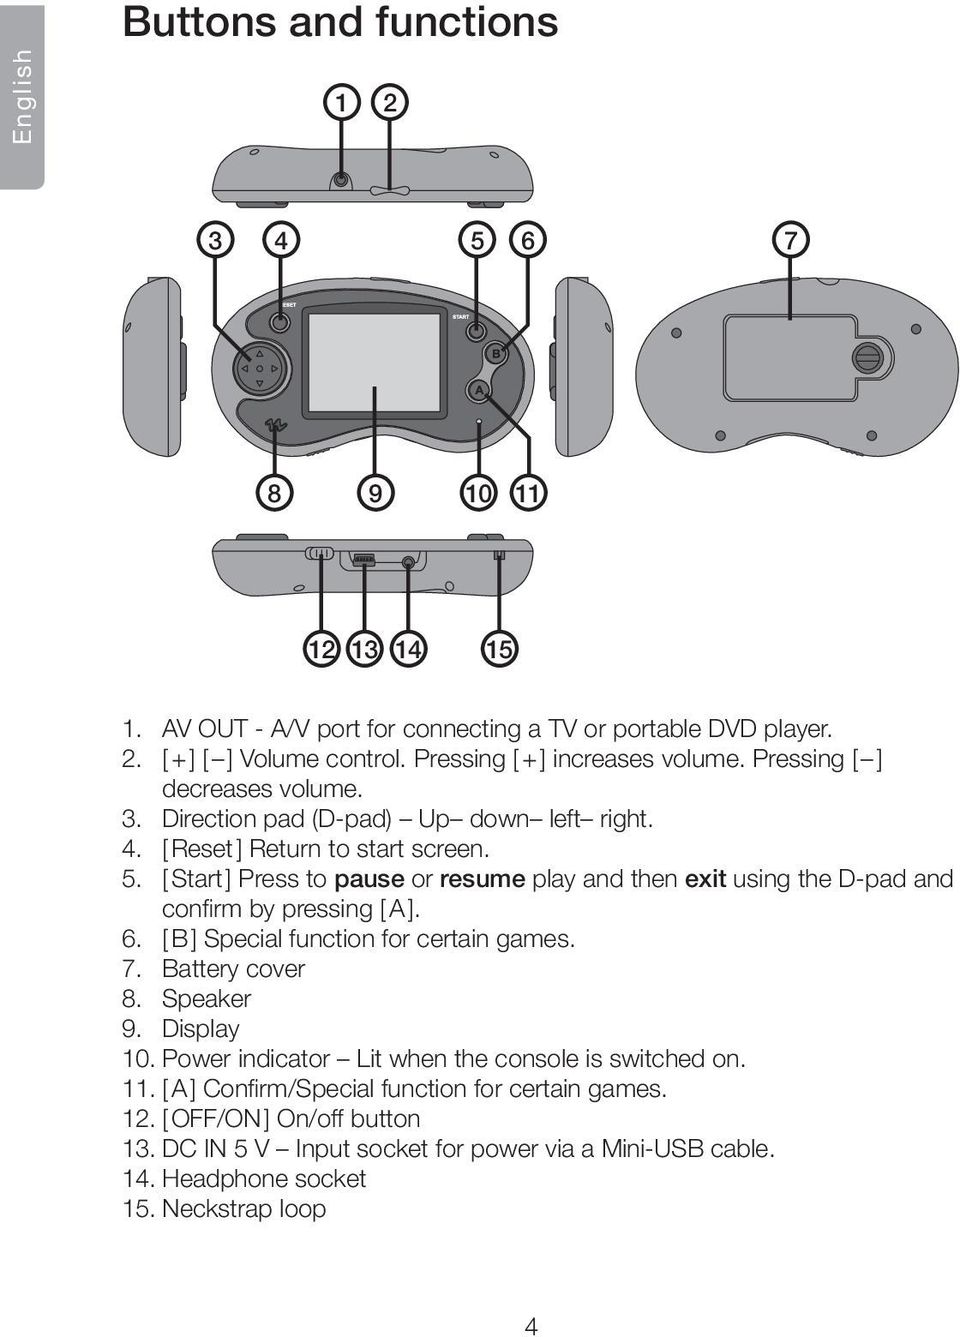 [ Start ] Press to pause or resume play and then exit using the D-pad and confirm by pressing [ A ]. 6. [ B ] Special function for certain games. 7. Battery cover 8. Speaker 9.